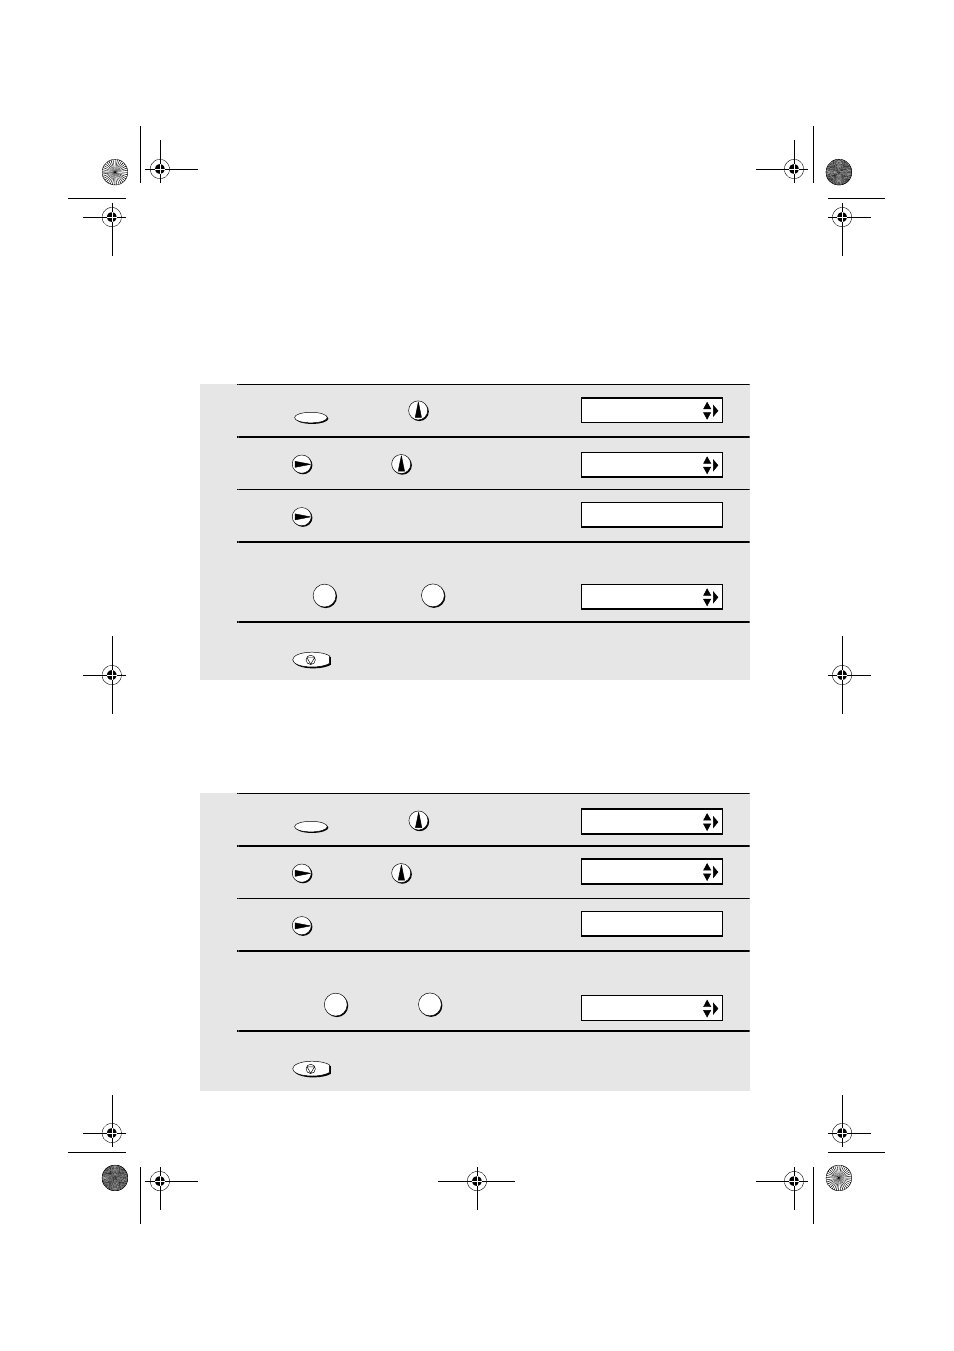 Print contrast setting, Setting the paper size | GE UX-CL 220 User Manual | Page 26 / 143